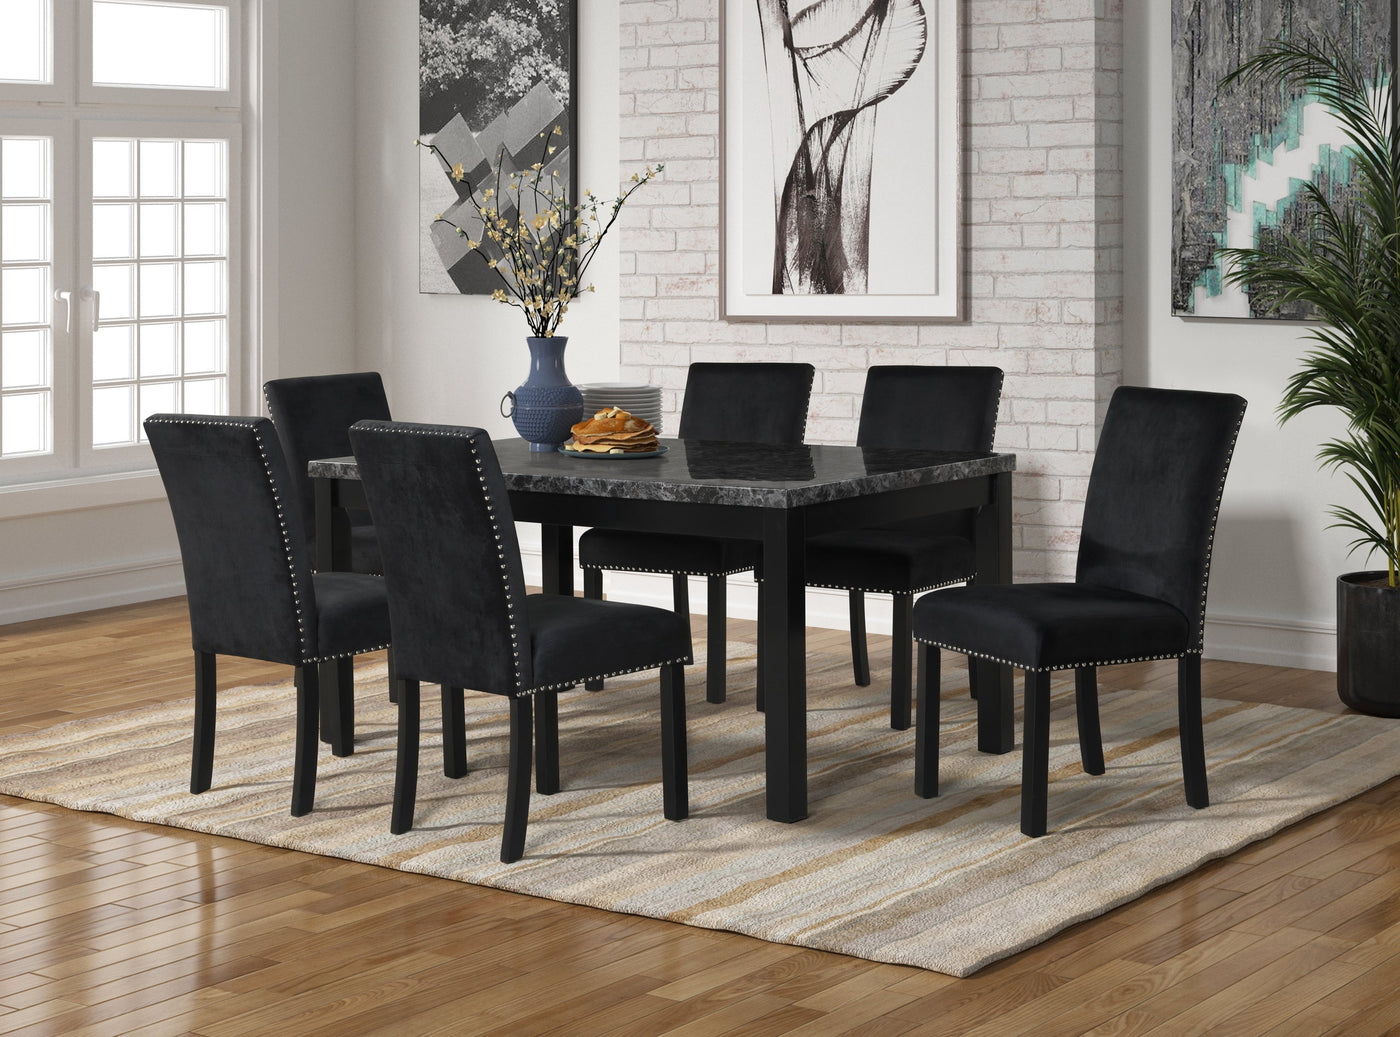 Camila - Dining Table + 6 Chair Set